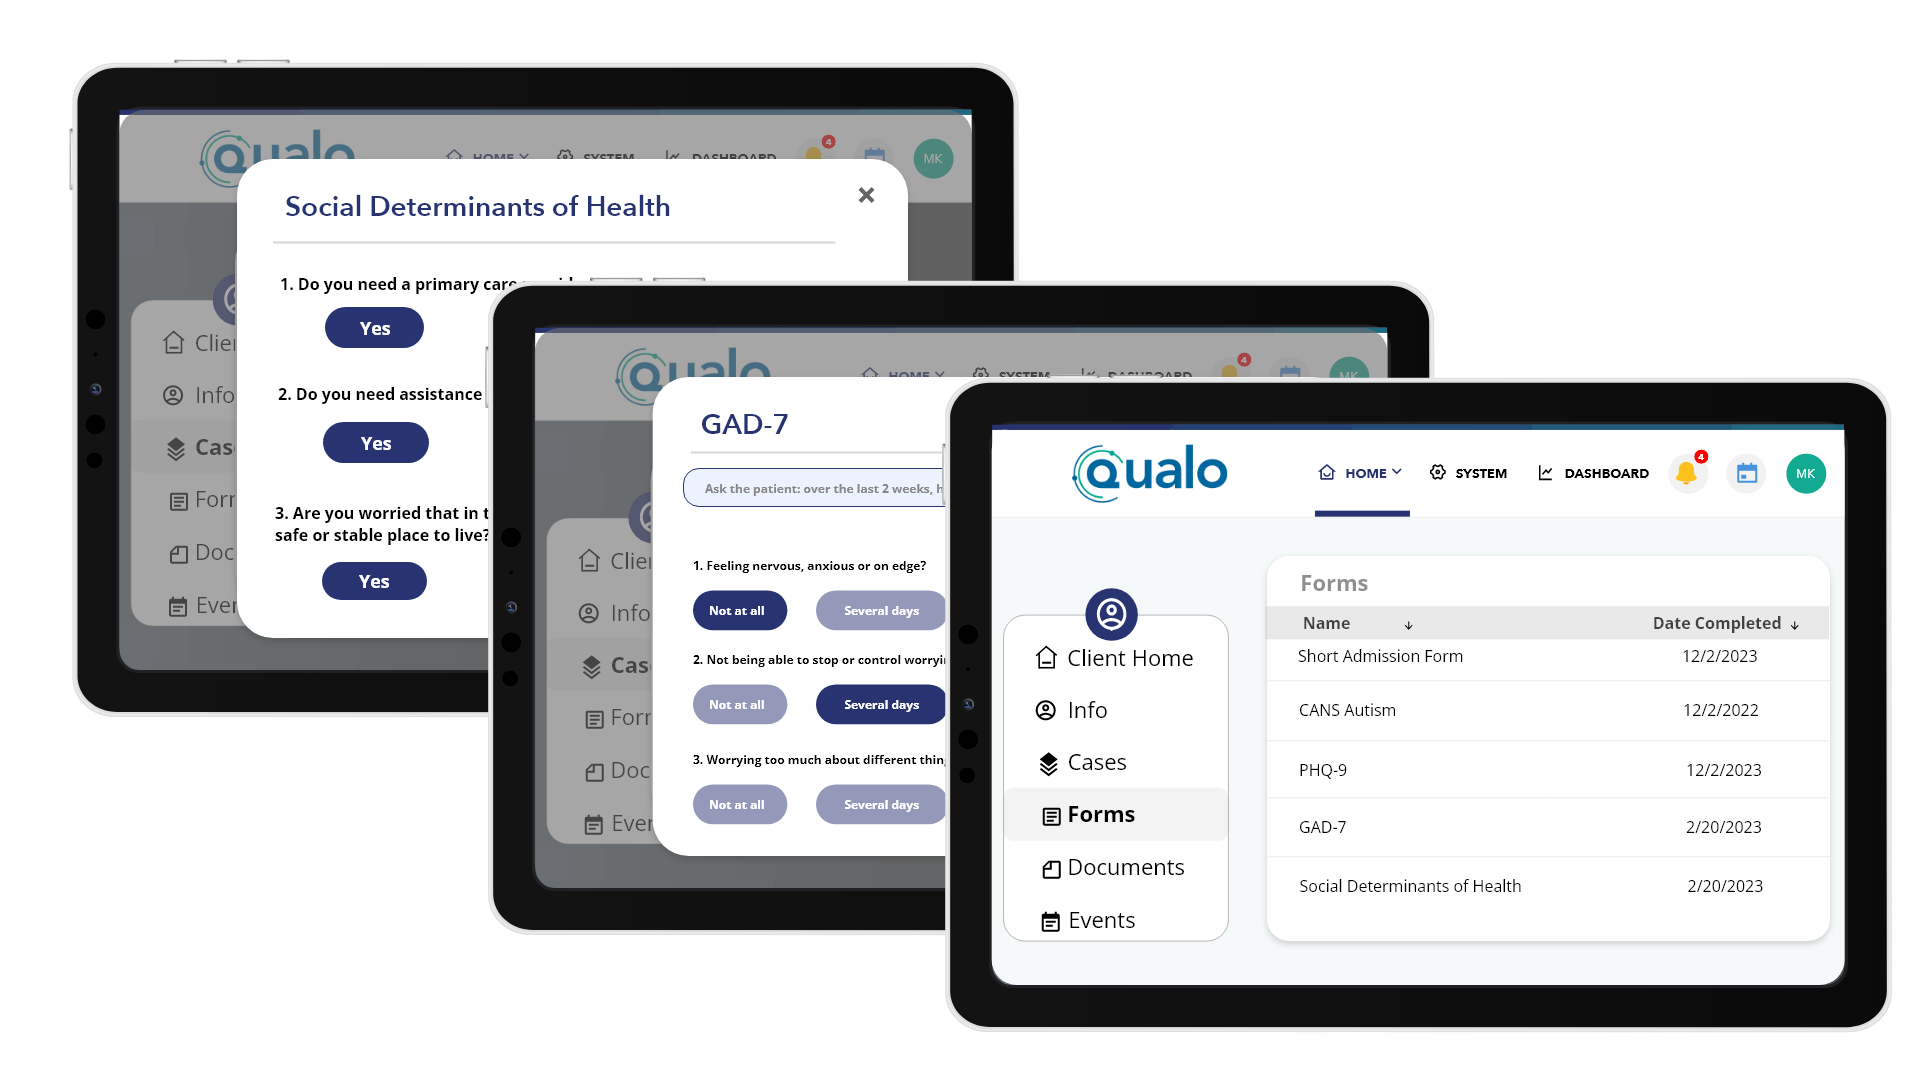 Guided workflows allow your staff to work efficiently and confidently while adhering to best practice data collection. QUALO workflows can be workflows can be customized to fit your organization’s unique needs and preferences.